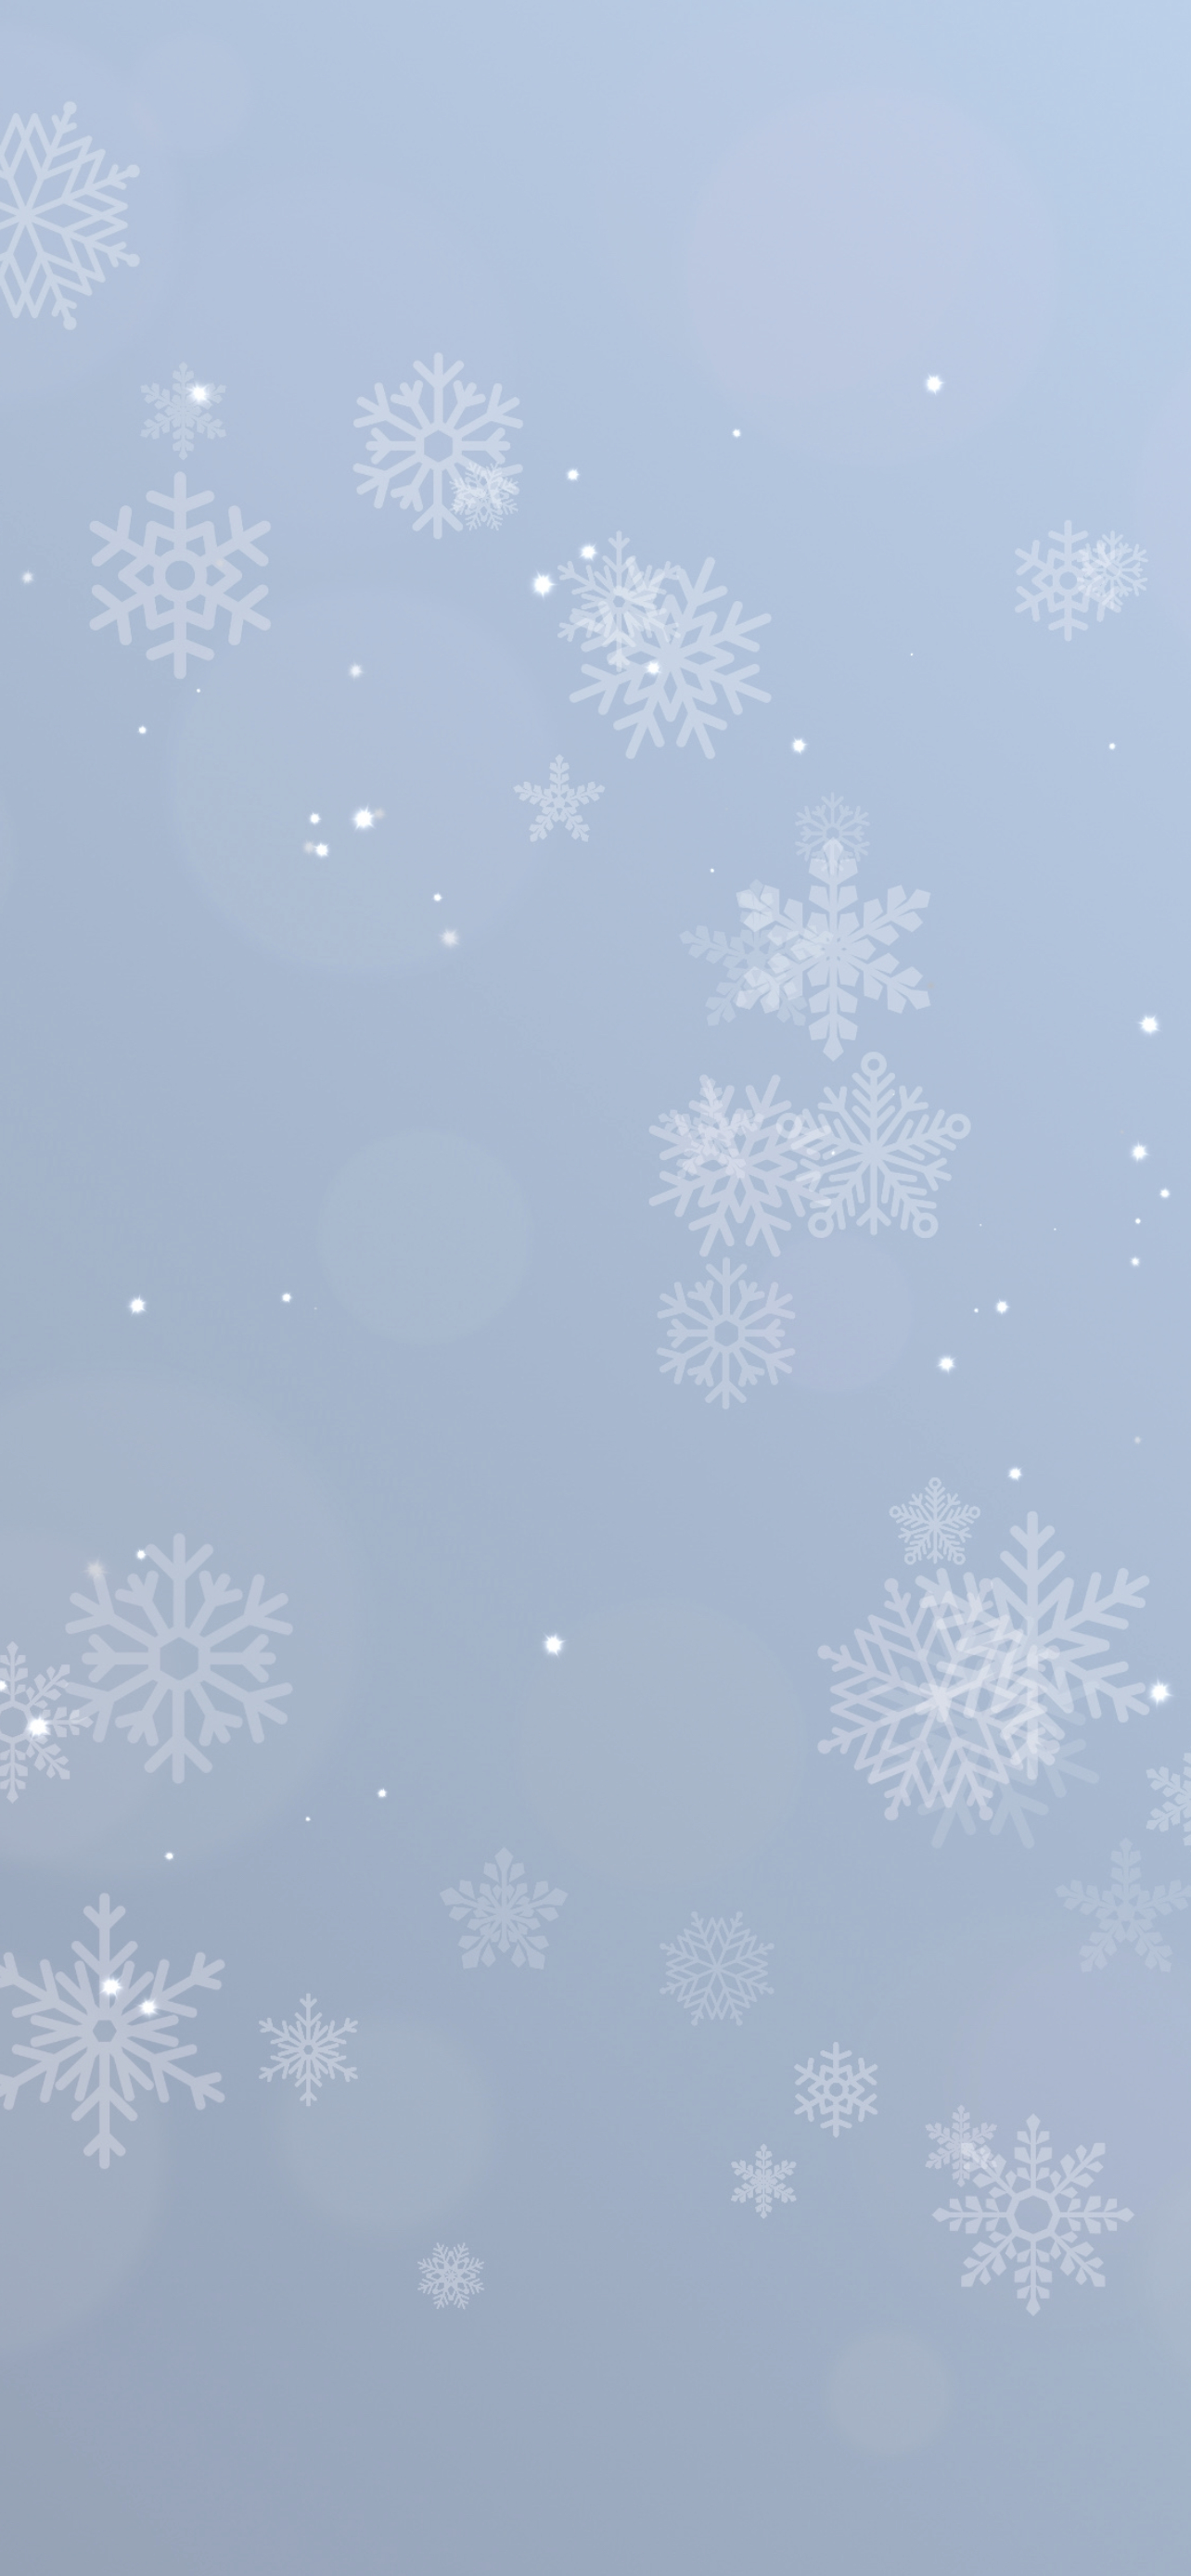 1284x2778 Falling snowflakes wallpapers to match iPhone 13 Pro colors